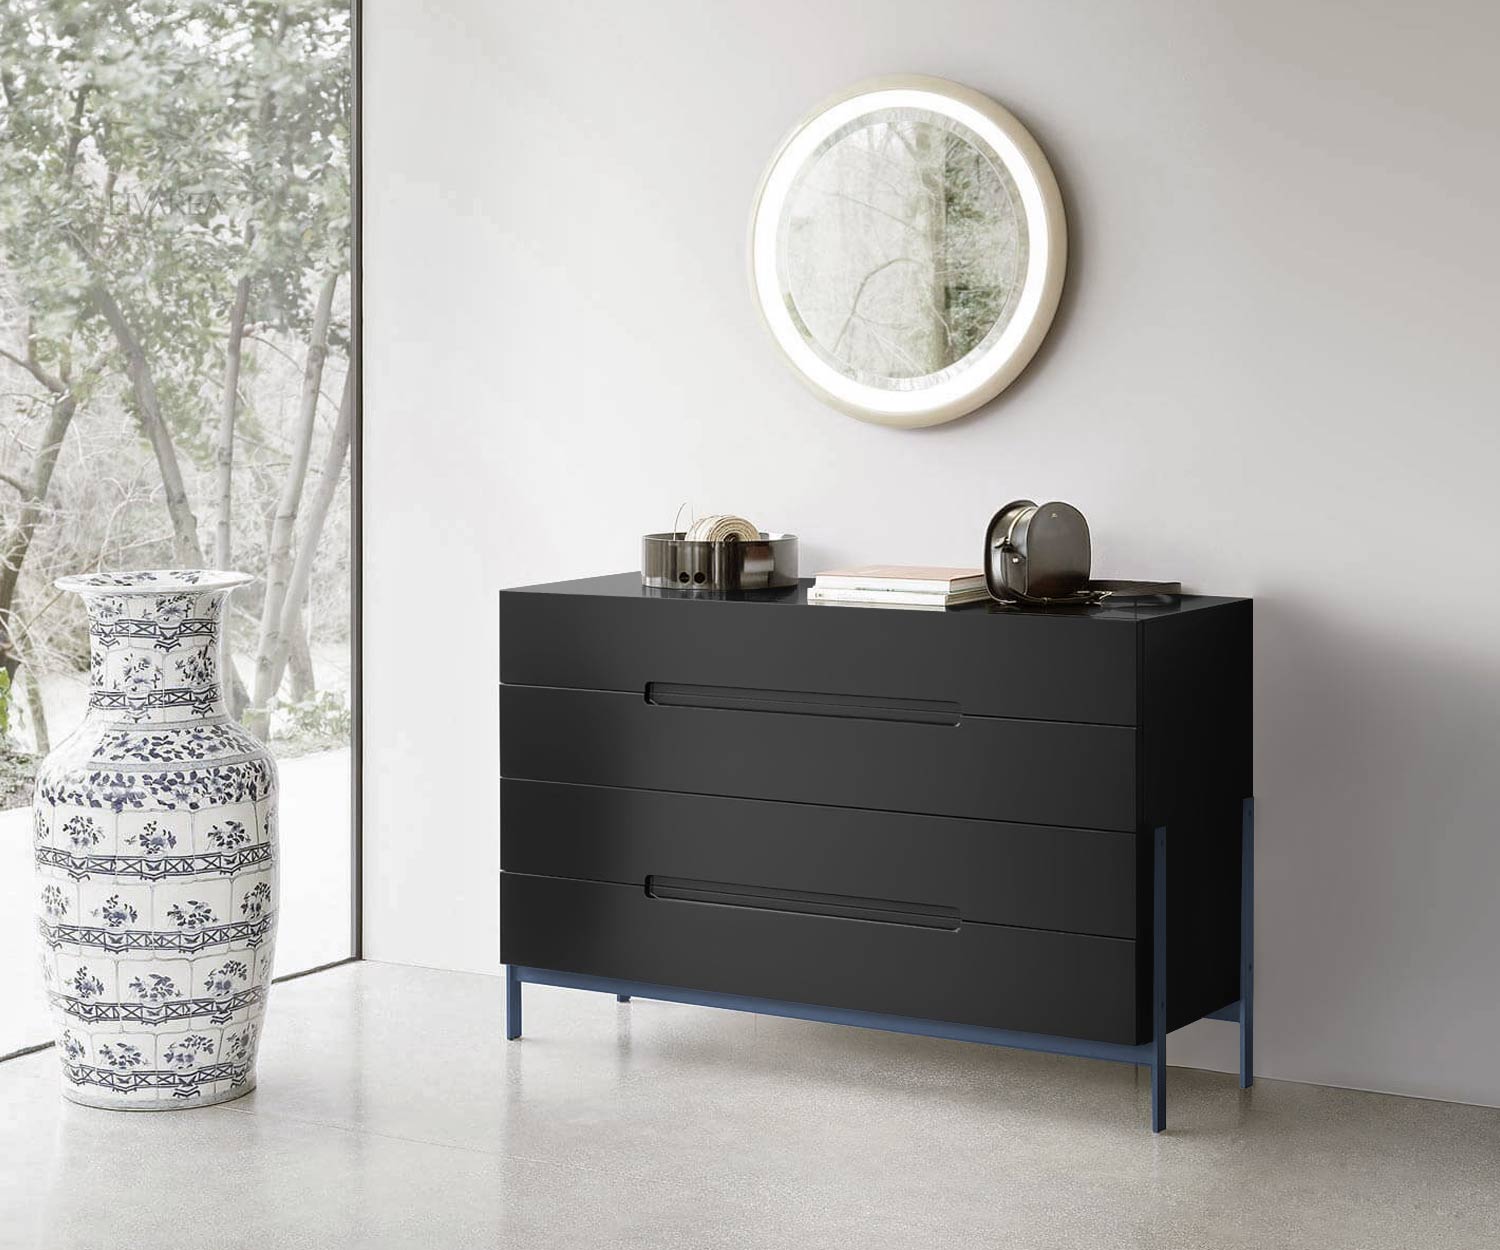 Exclusive Novamobili Float design chest of drawers on blue legs in black